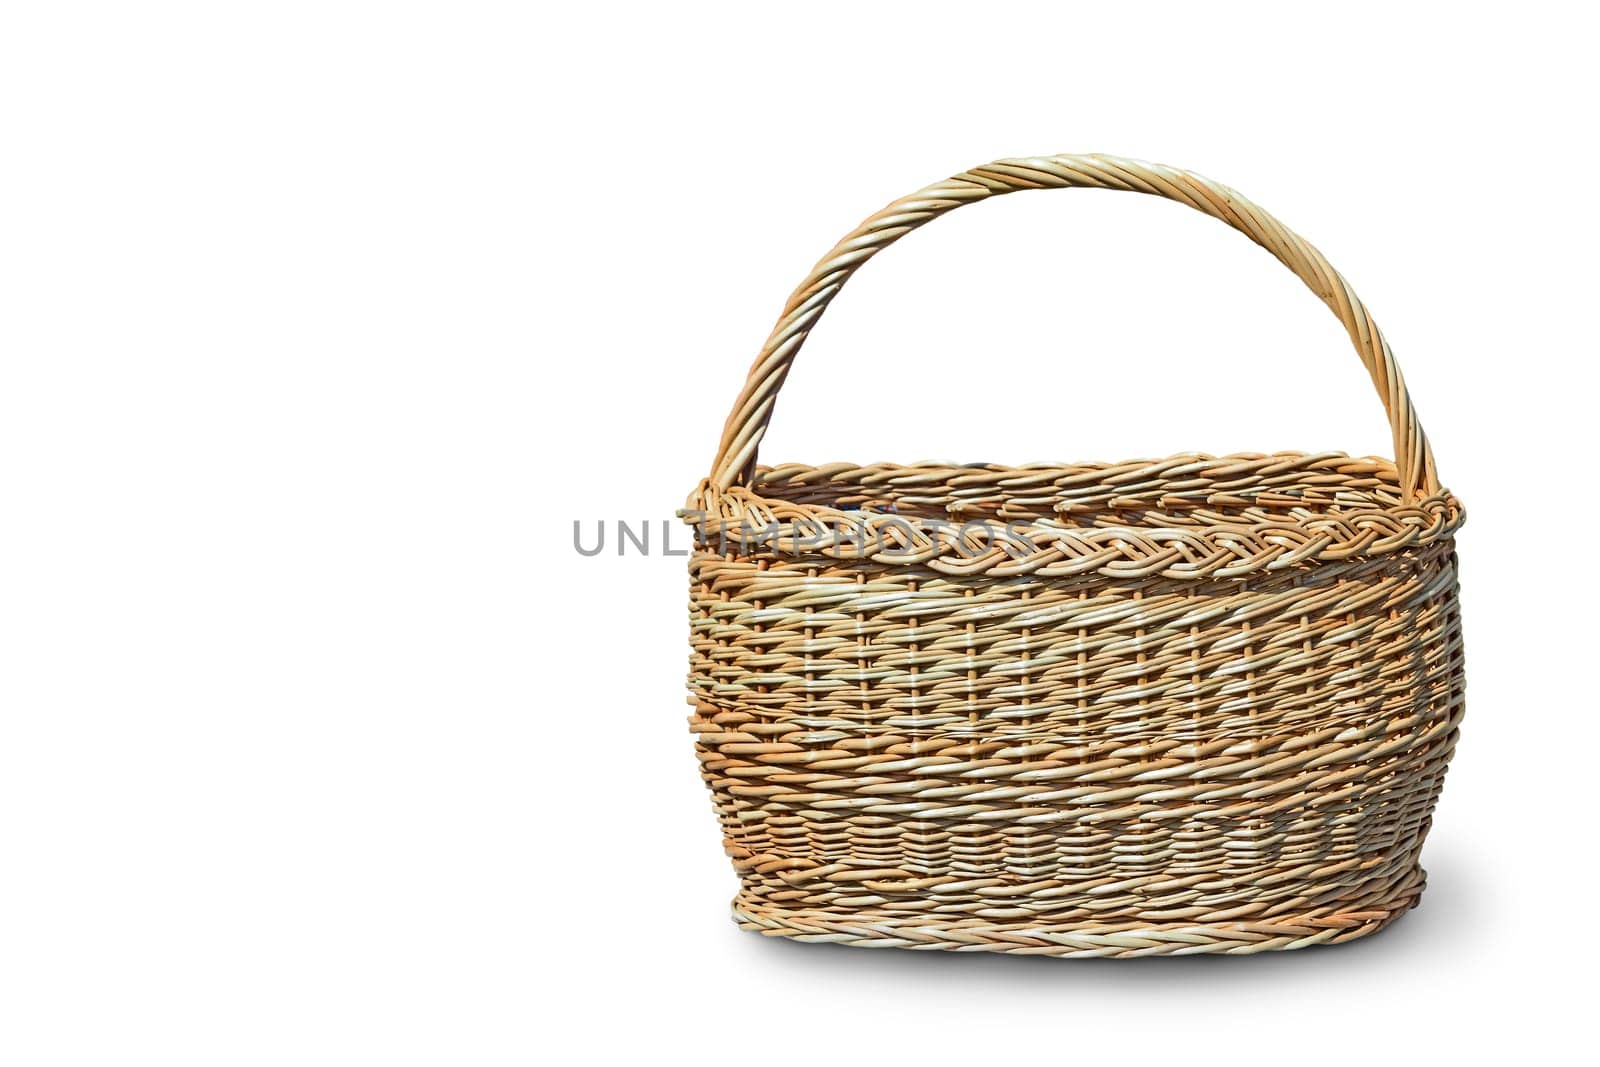 Comfortable wicker basket on a white background. by georgina198